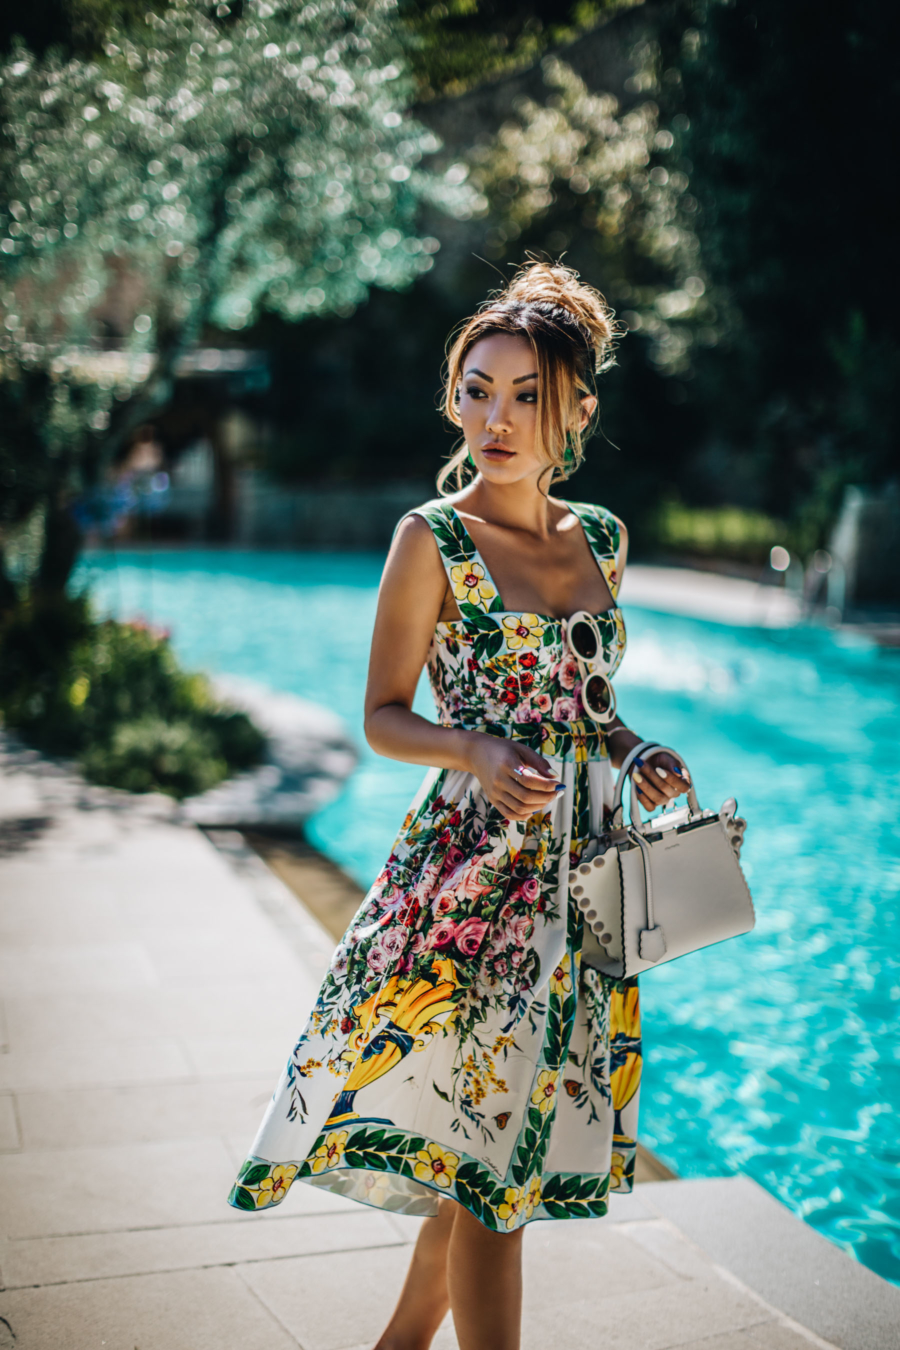 Dolce and Gabbana Floral Dress - Floral Dresses for Your Summer Vacations // NotJessFashion.com